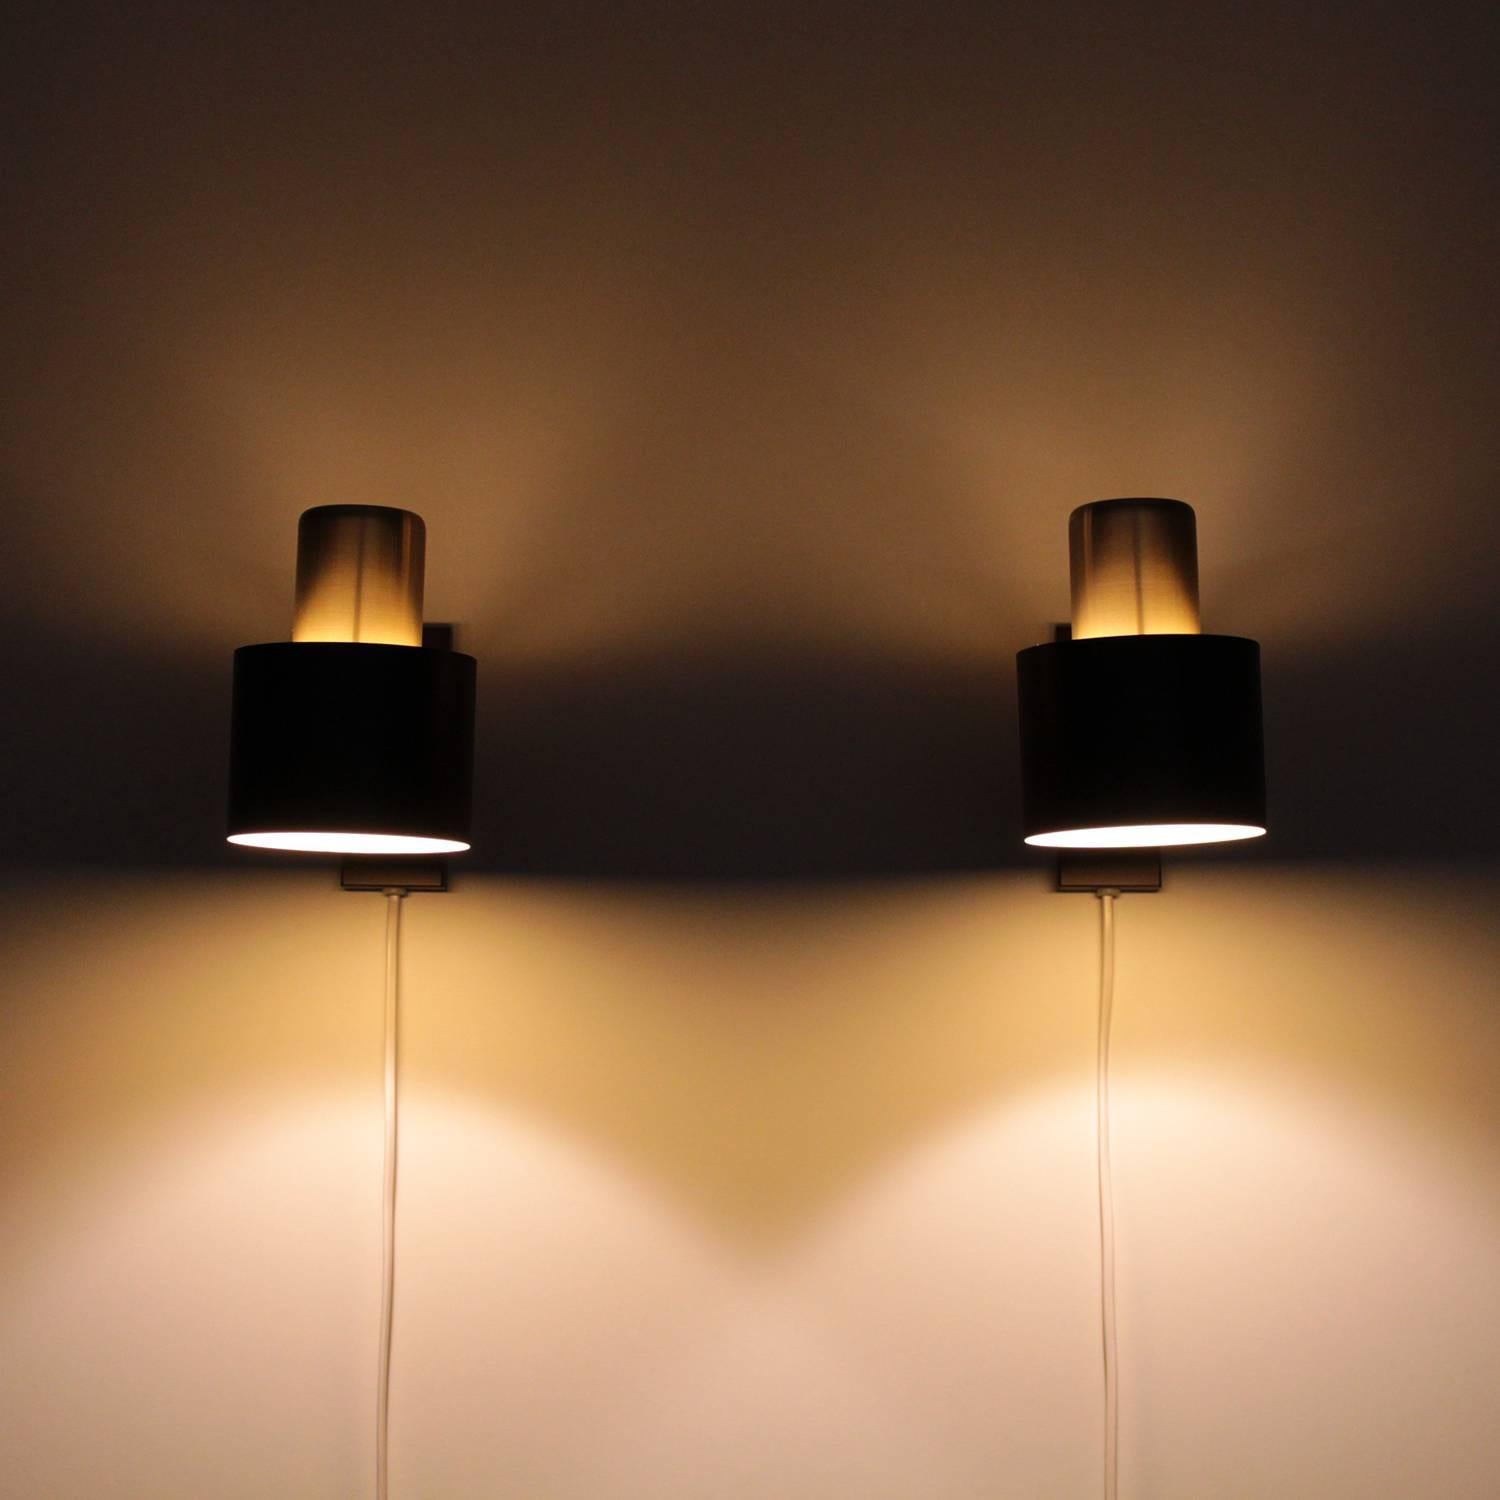 ALFA - pair of wall lights, designed by Jo Hammerborg for Fog & Mørup in 1963 - Danish mid-century design in very good vintage condition!

A fantastic pair of wall lamps with adjustable shades in brass and warm brown lacquered aluminum with